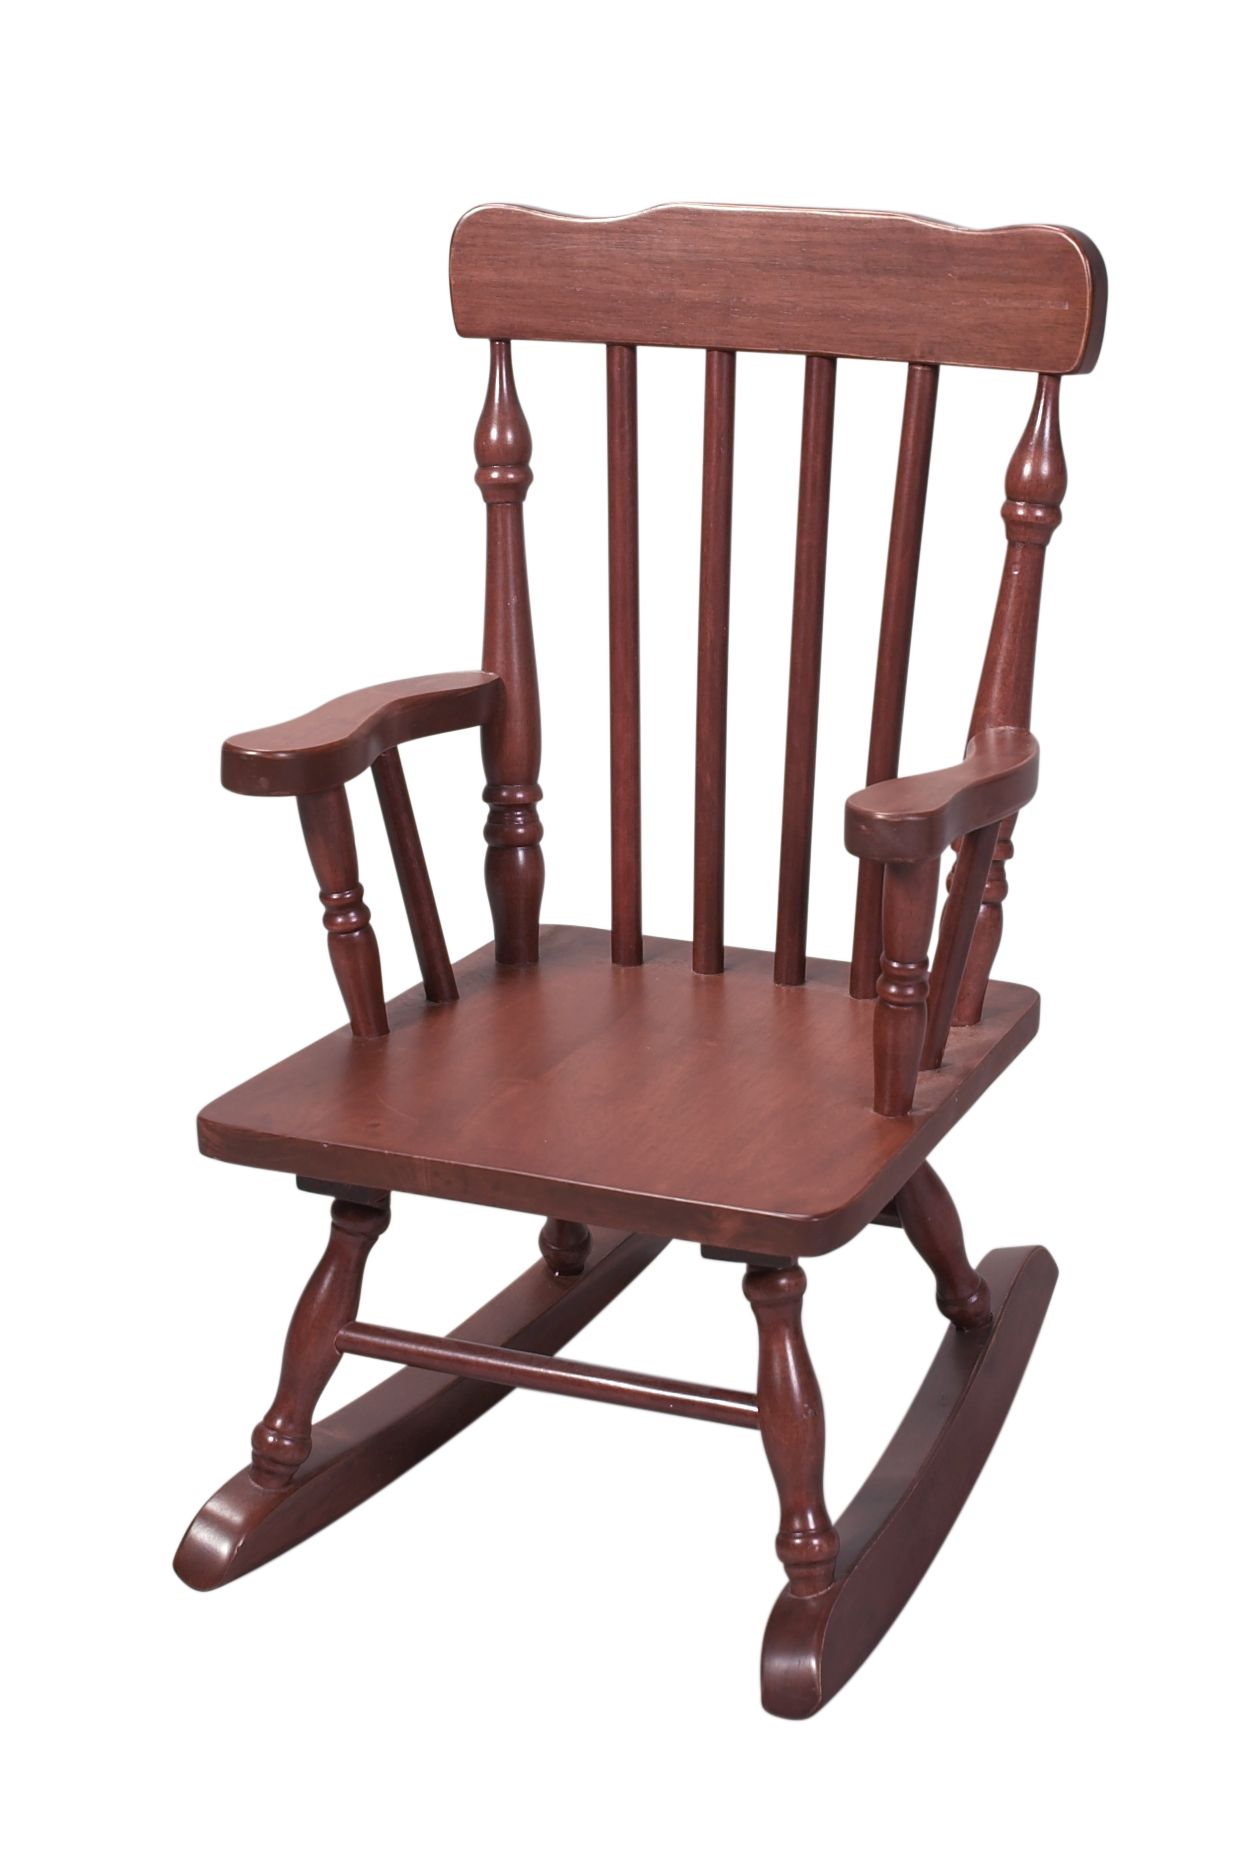 3100C Child's Spindle Rocking Chair in Cherry